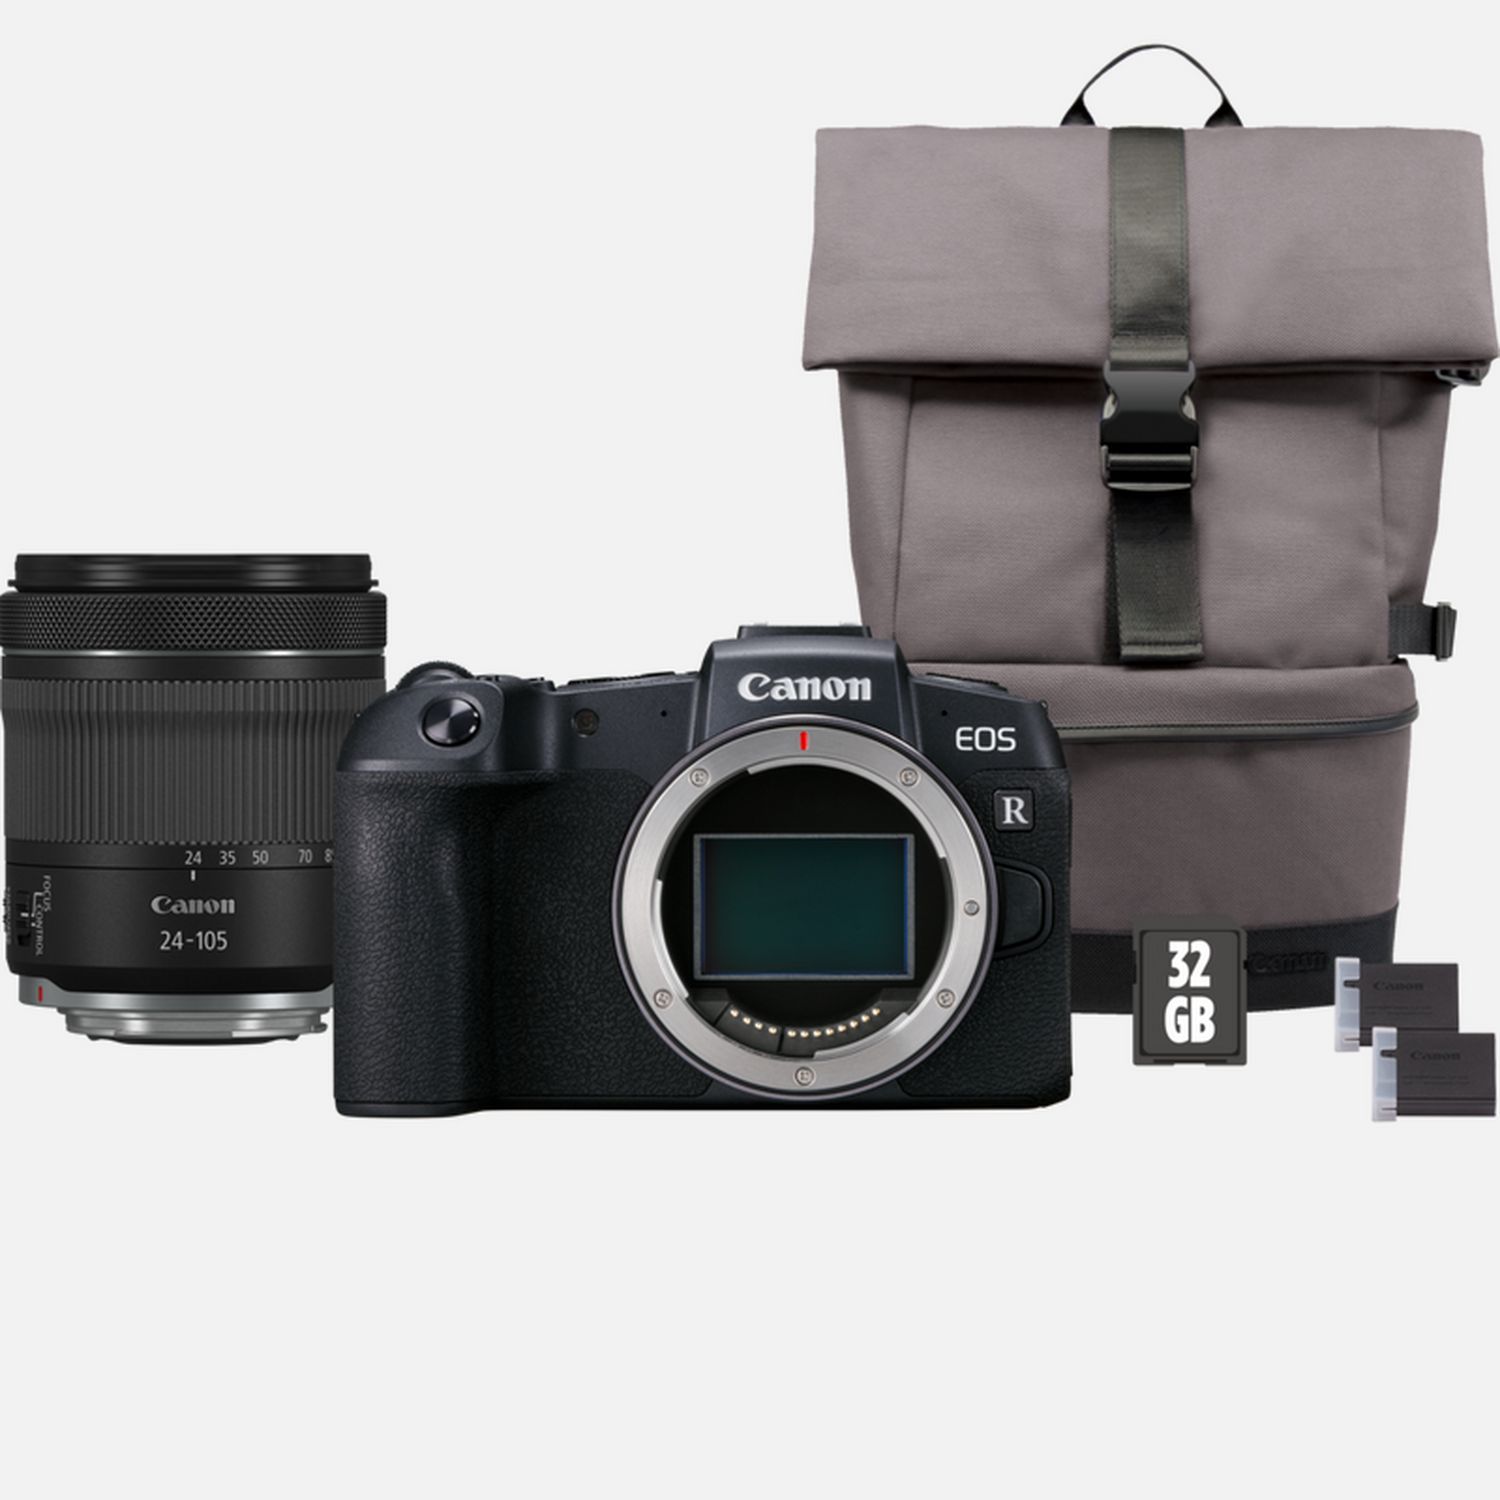 Buy Canon IS EOS Store RP Canon + Battery — RF Wi-Fi + SD Lens Spare in STM 24-105mm card UAE + Cameras Body Backpack 